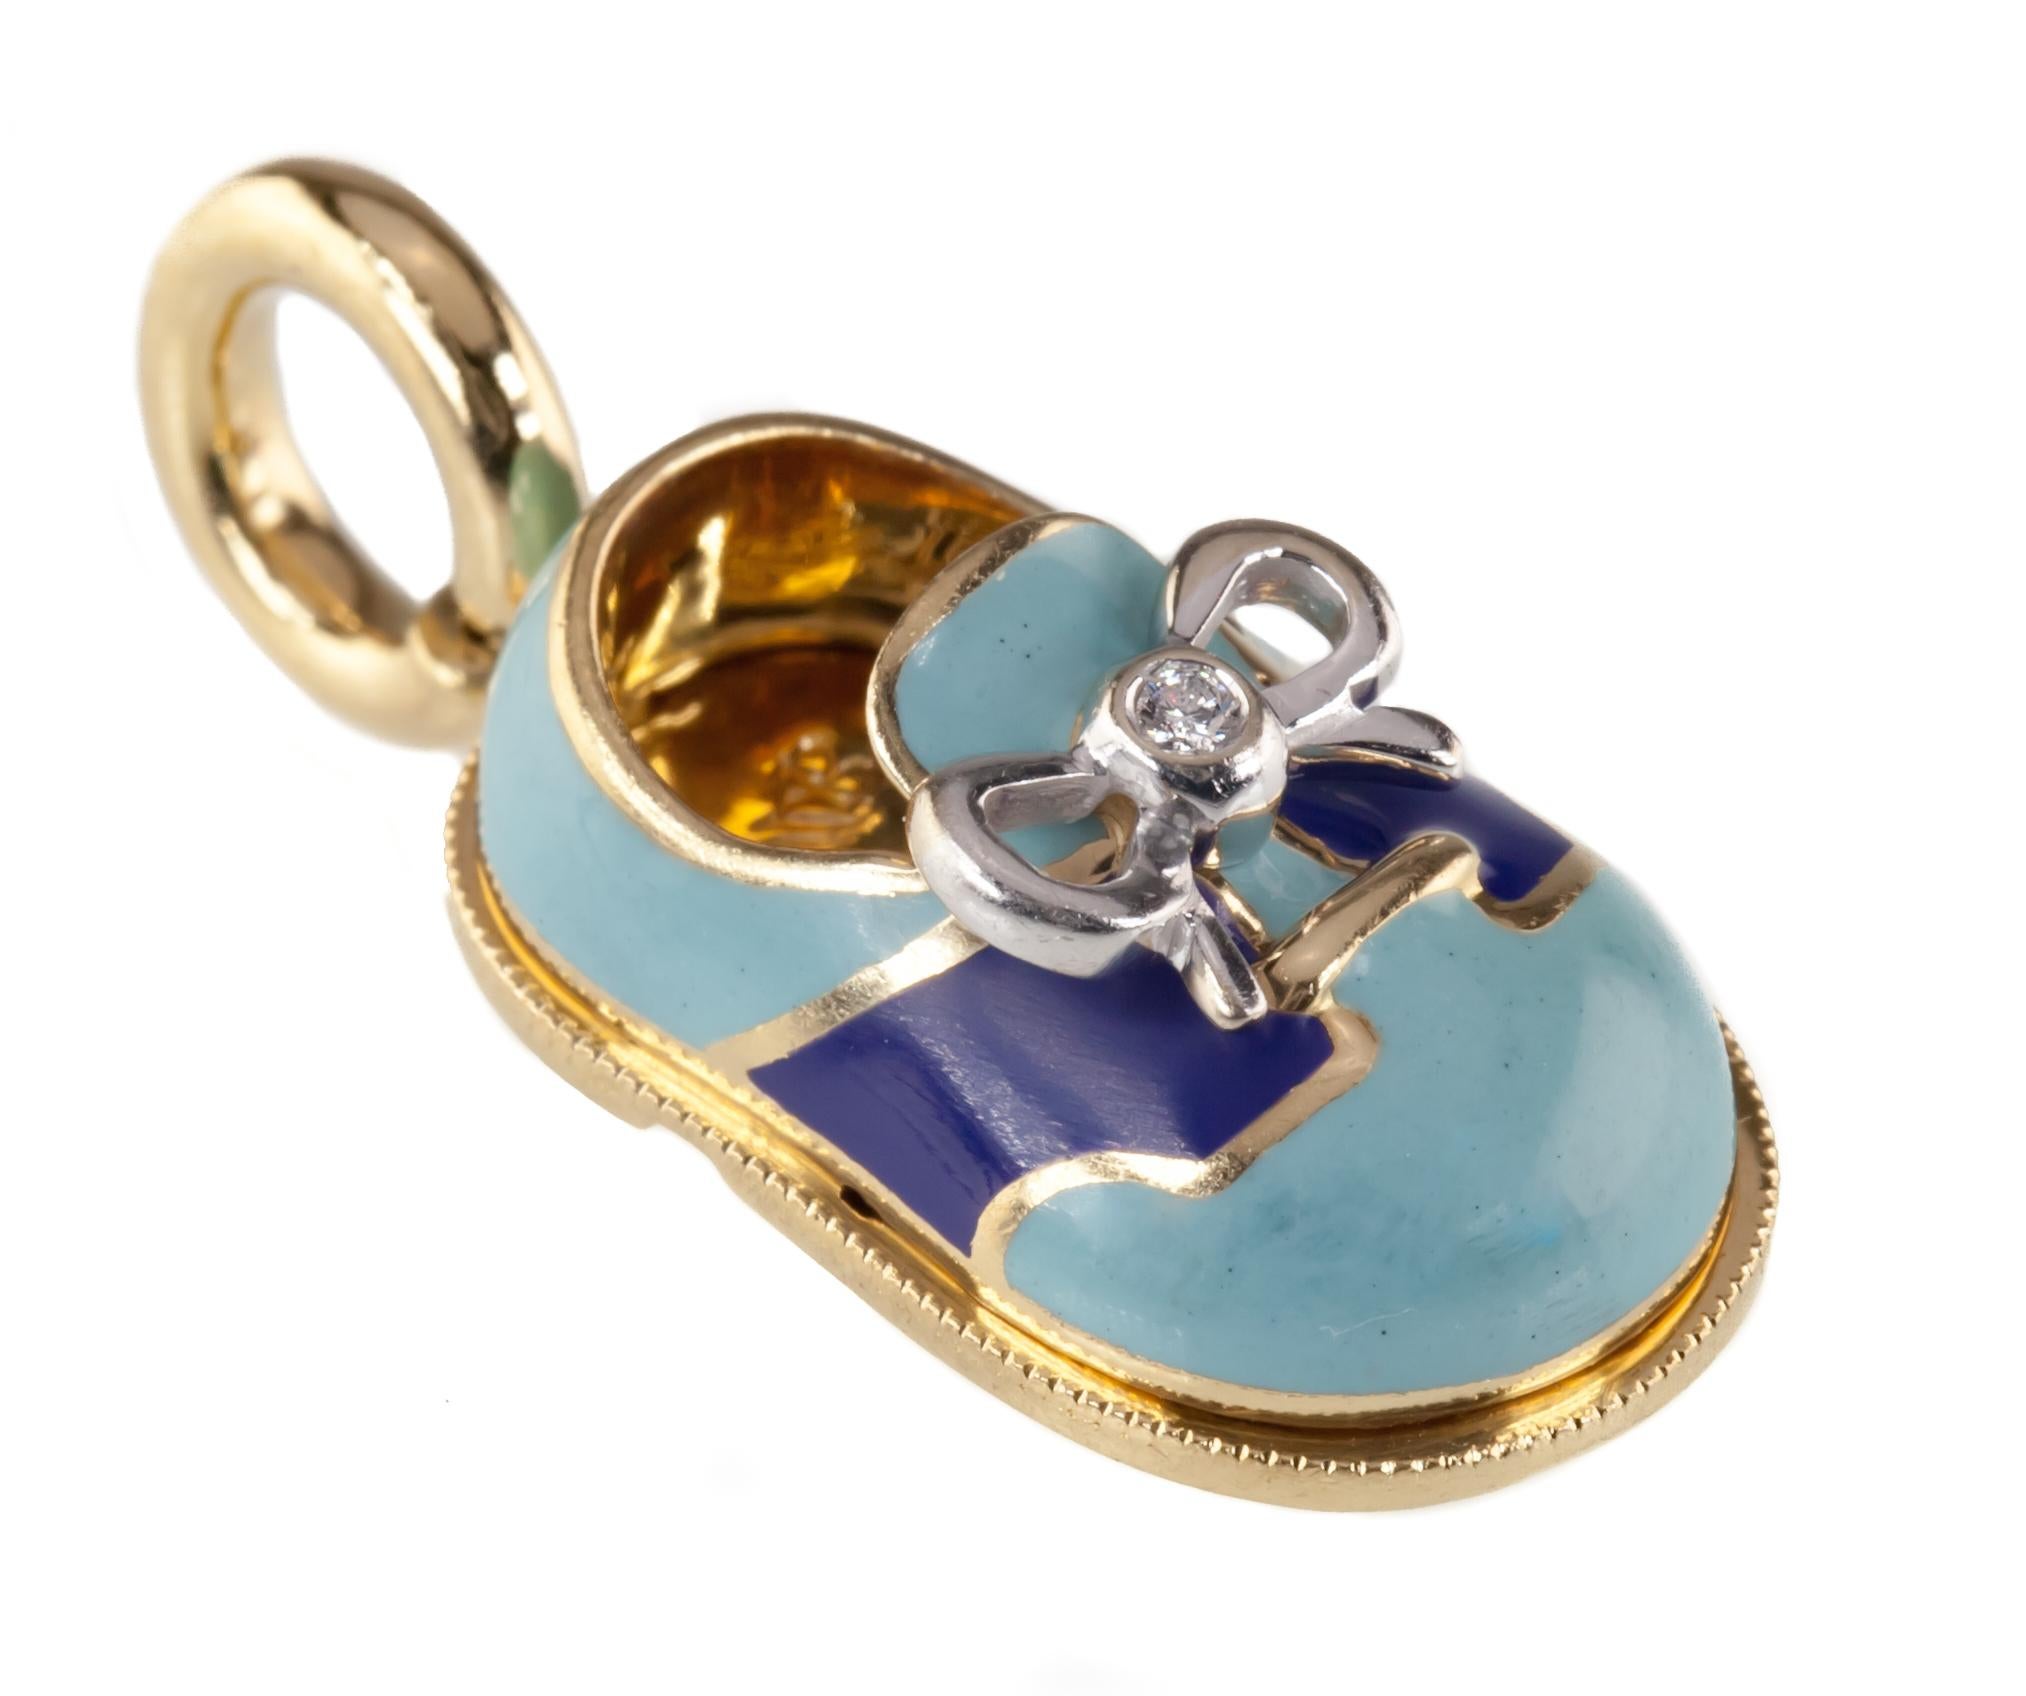 Gorgeous Aaron Basha Boy's Shoe Pendant
Features Light and Dark Blue Enamel with Diamond Accent on Tied Shoelaces
TDW = 0.01 Ct, F Color, SI1 Clarity
Total Mass = 7.4 grams
Length of pendant = 27 mm (Including Bail)
Width of pendant = 12 mm
Gorgeous